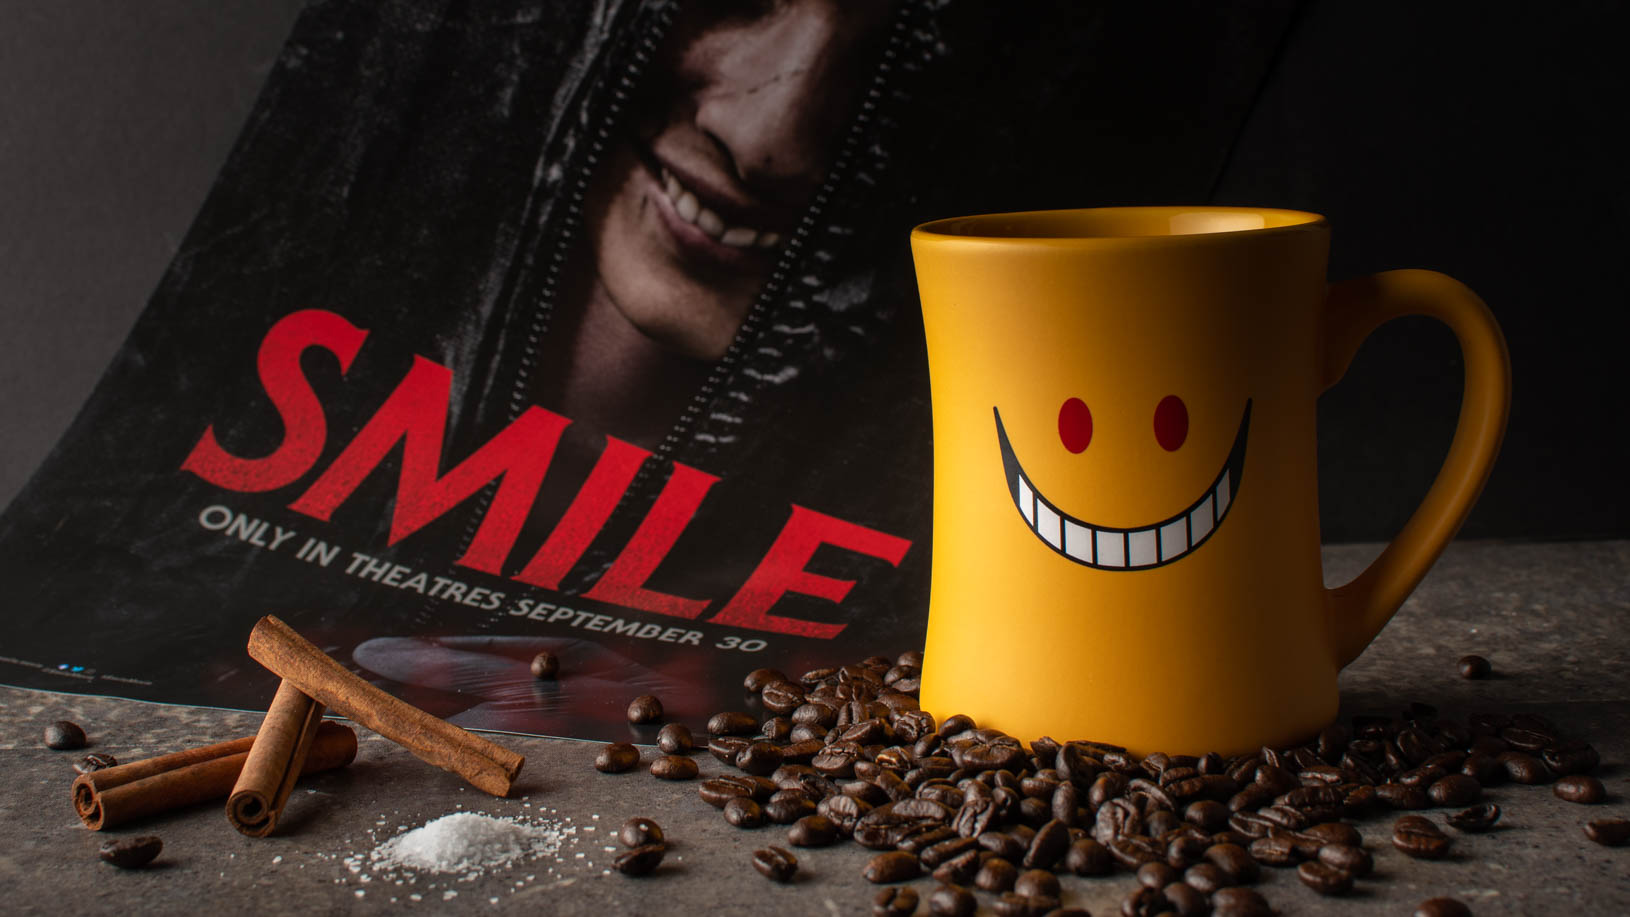 Inspired by the horror film Smile, The Geeks have put together a guide to making your coffee bring a smile to your face. 2geekswhoeat.com #coffee #SmileMovie #CoffeeTips